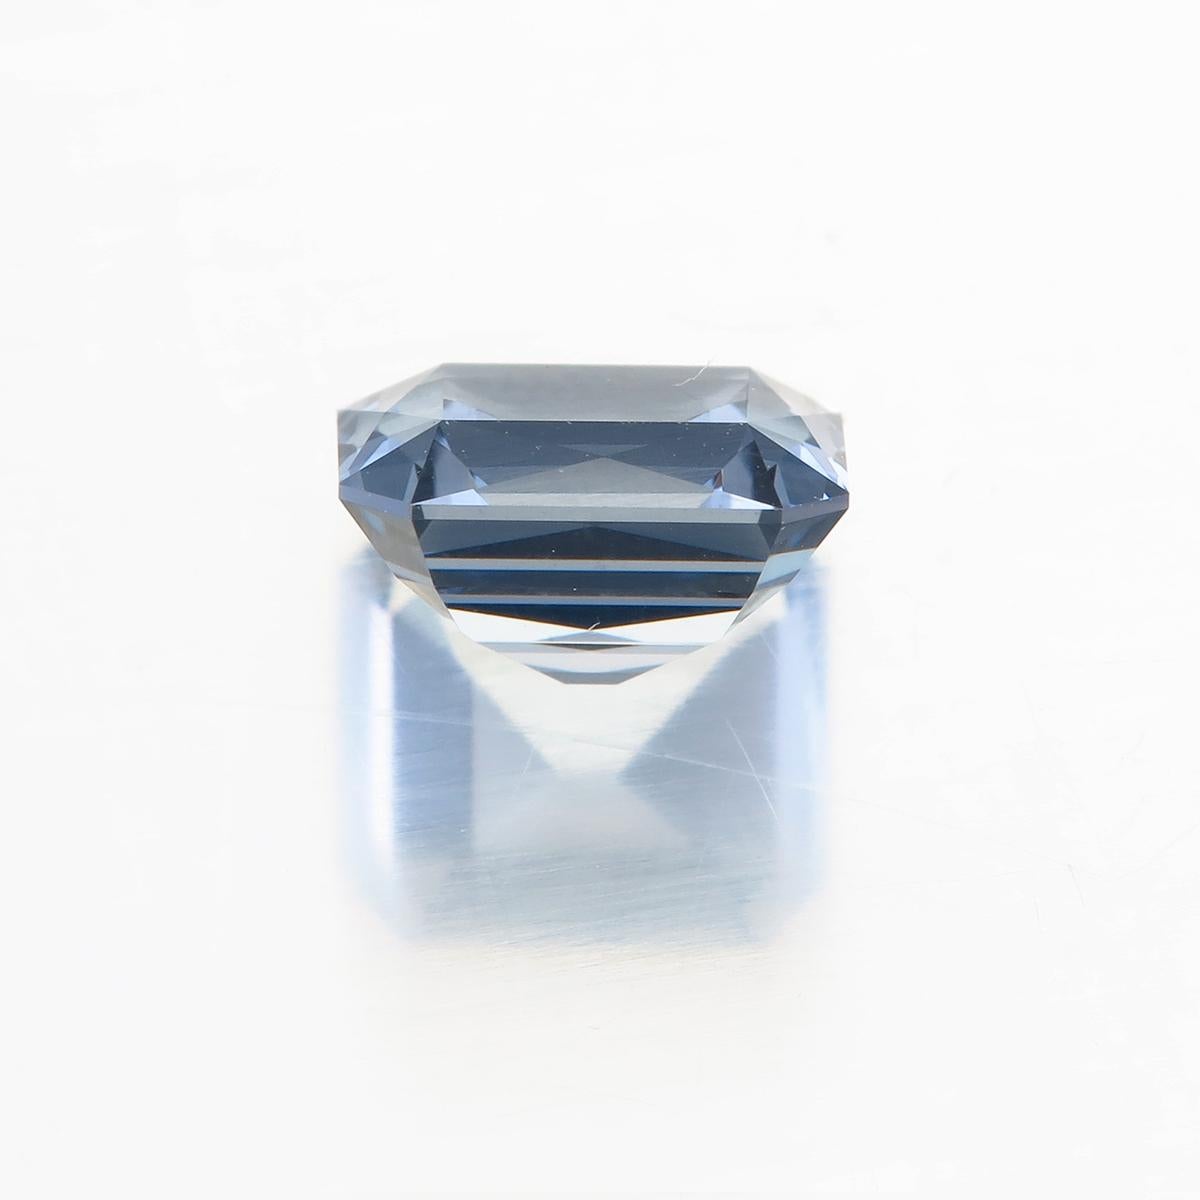 Sparkling Flawless 2.11 Carat Blue Spinel Lotus Certified No Heat In New Condition For Sale In Hua Hin, TH